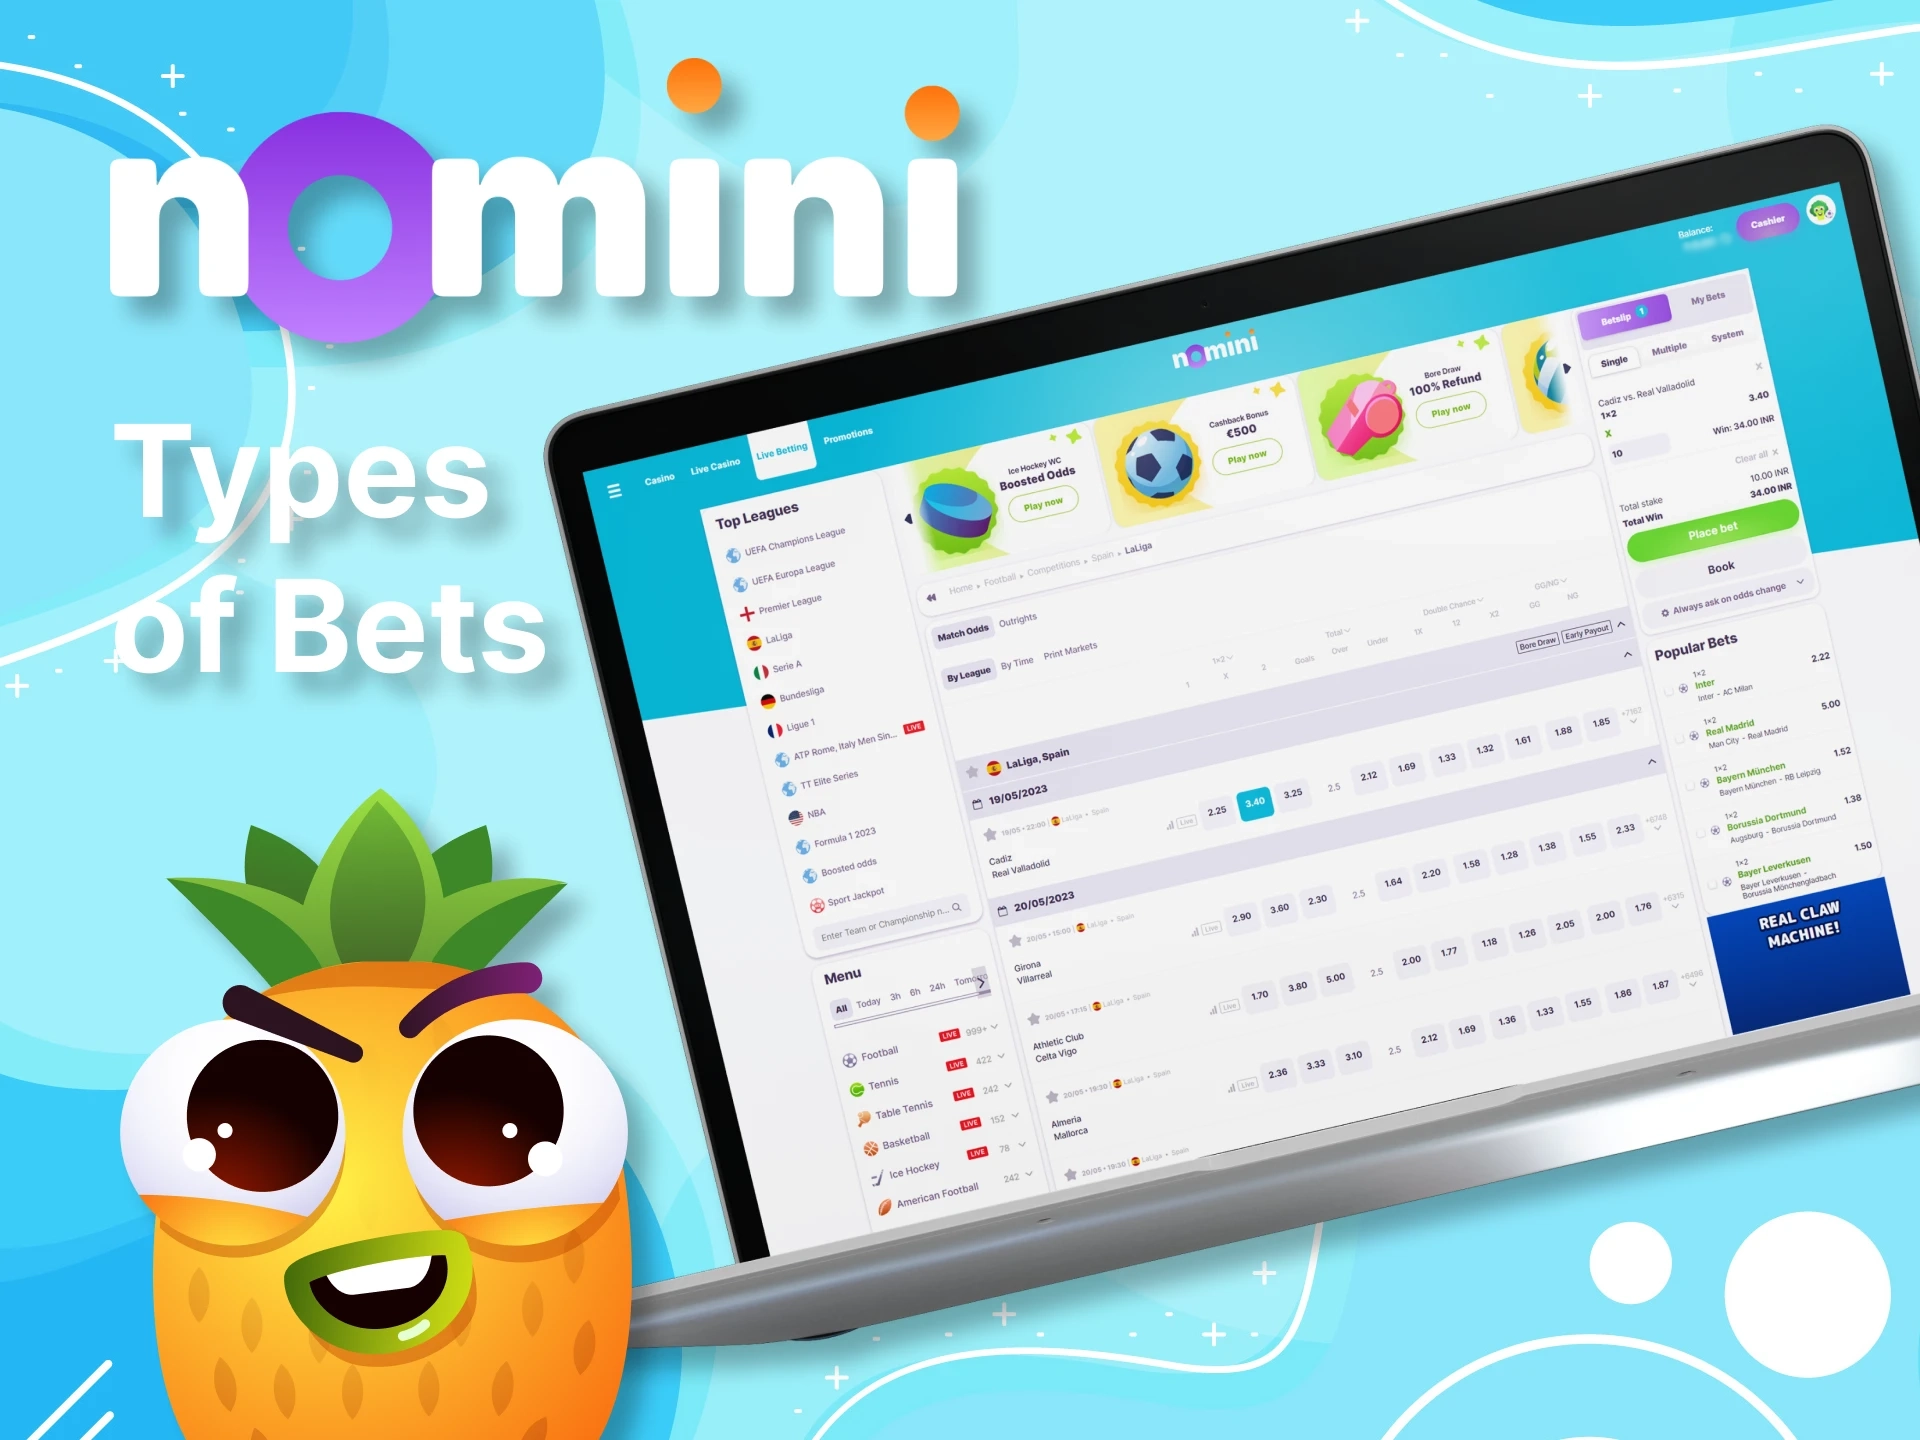 In Nomini, there are different types of bets available for your convenience.